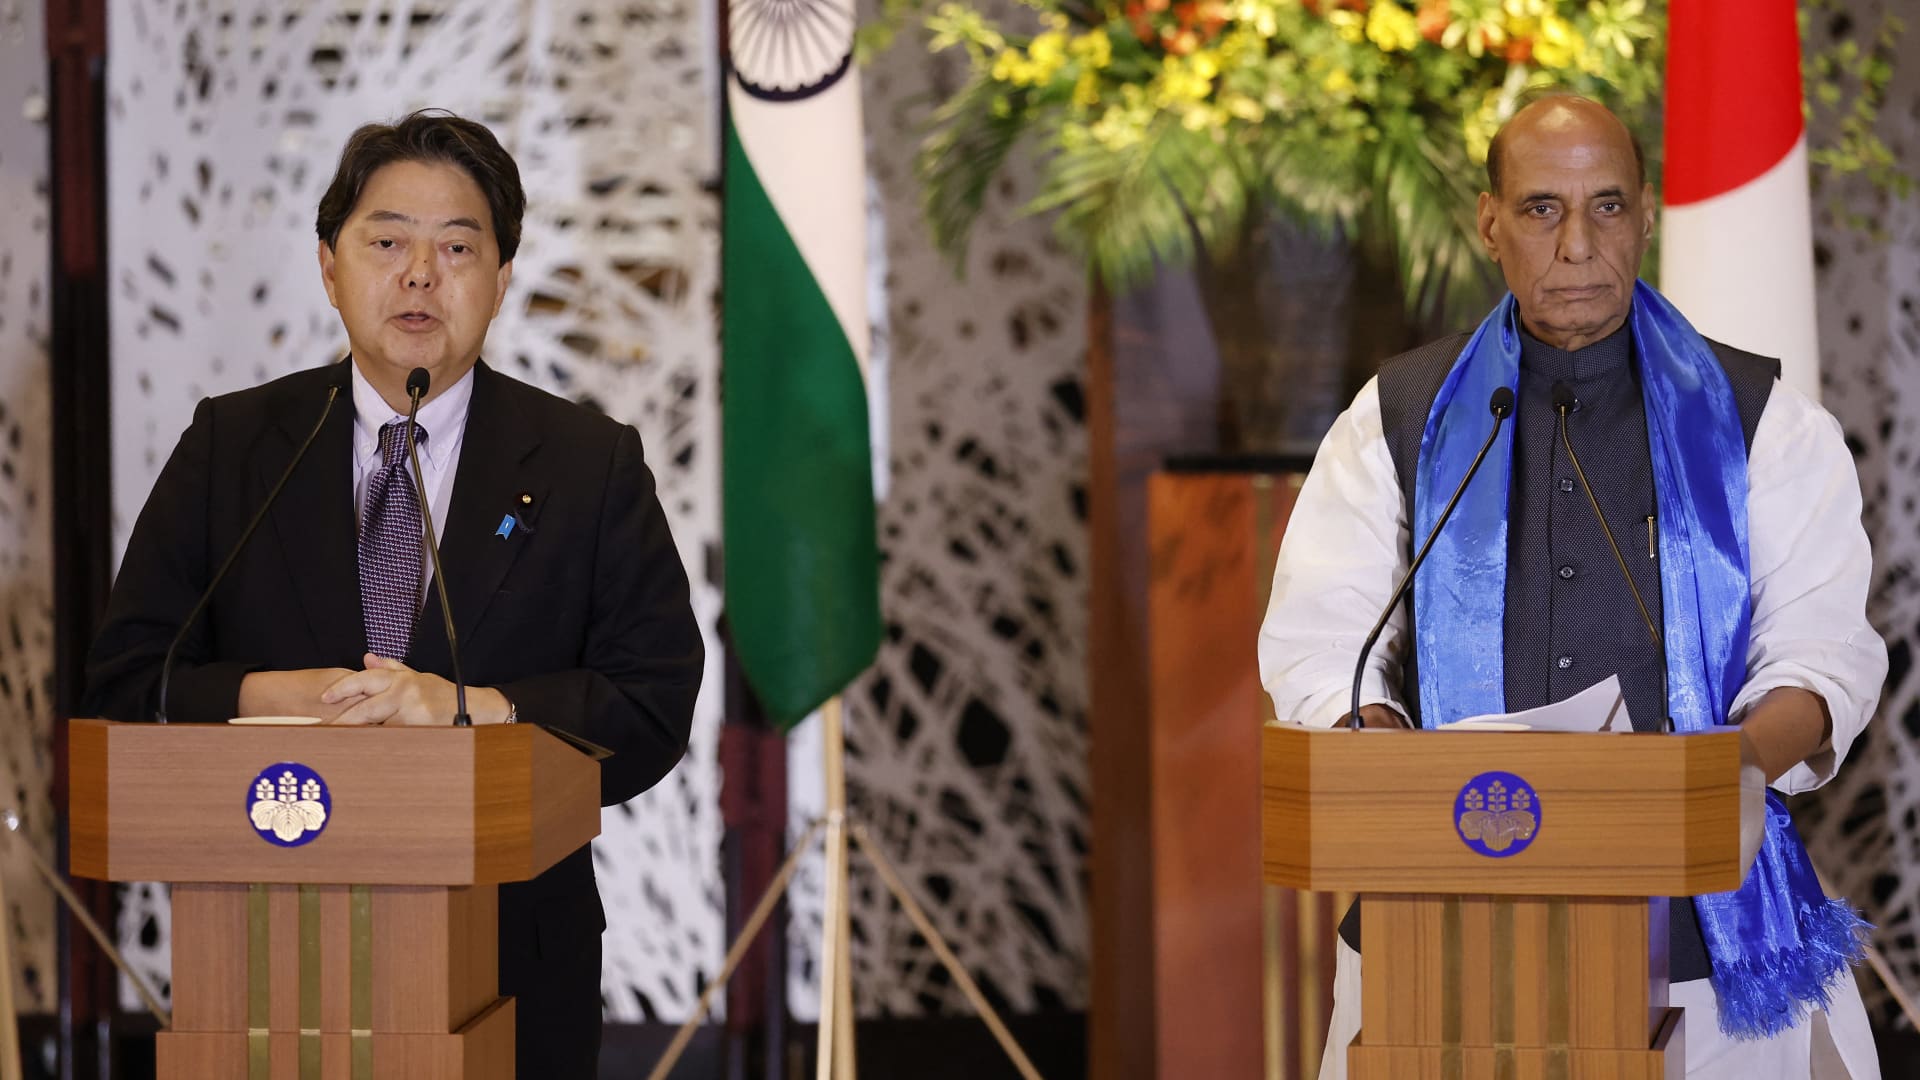 Japan's Foreign Minister Yoshimasa Hayashi (L) and India's Defense Minister Rajnath Singh, attend a news conference at the Iikura Guest House in Tokyo on September 8, 2022.